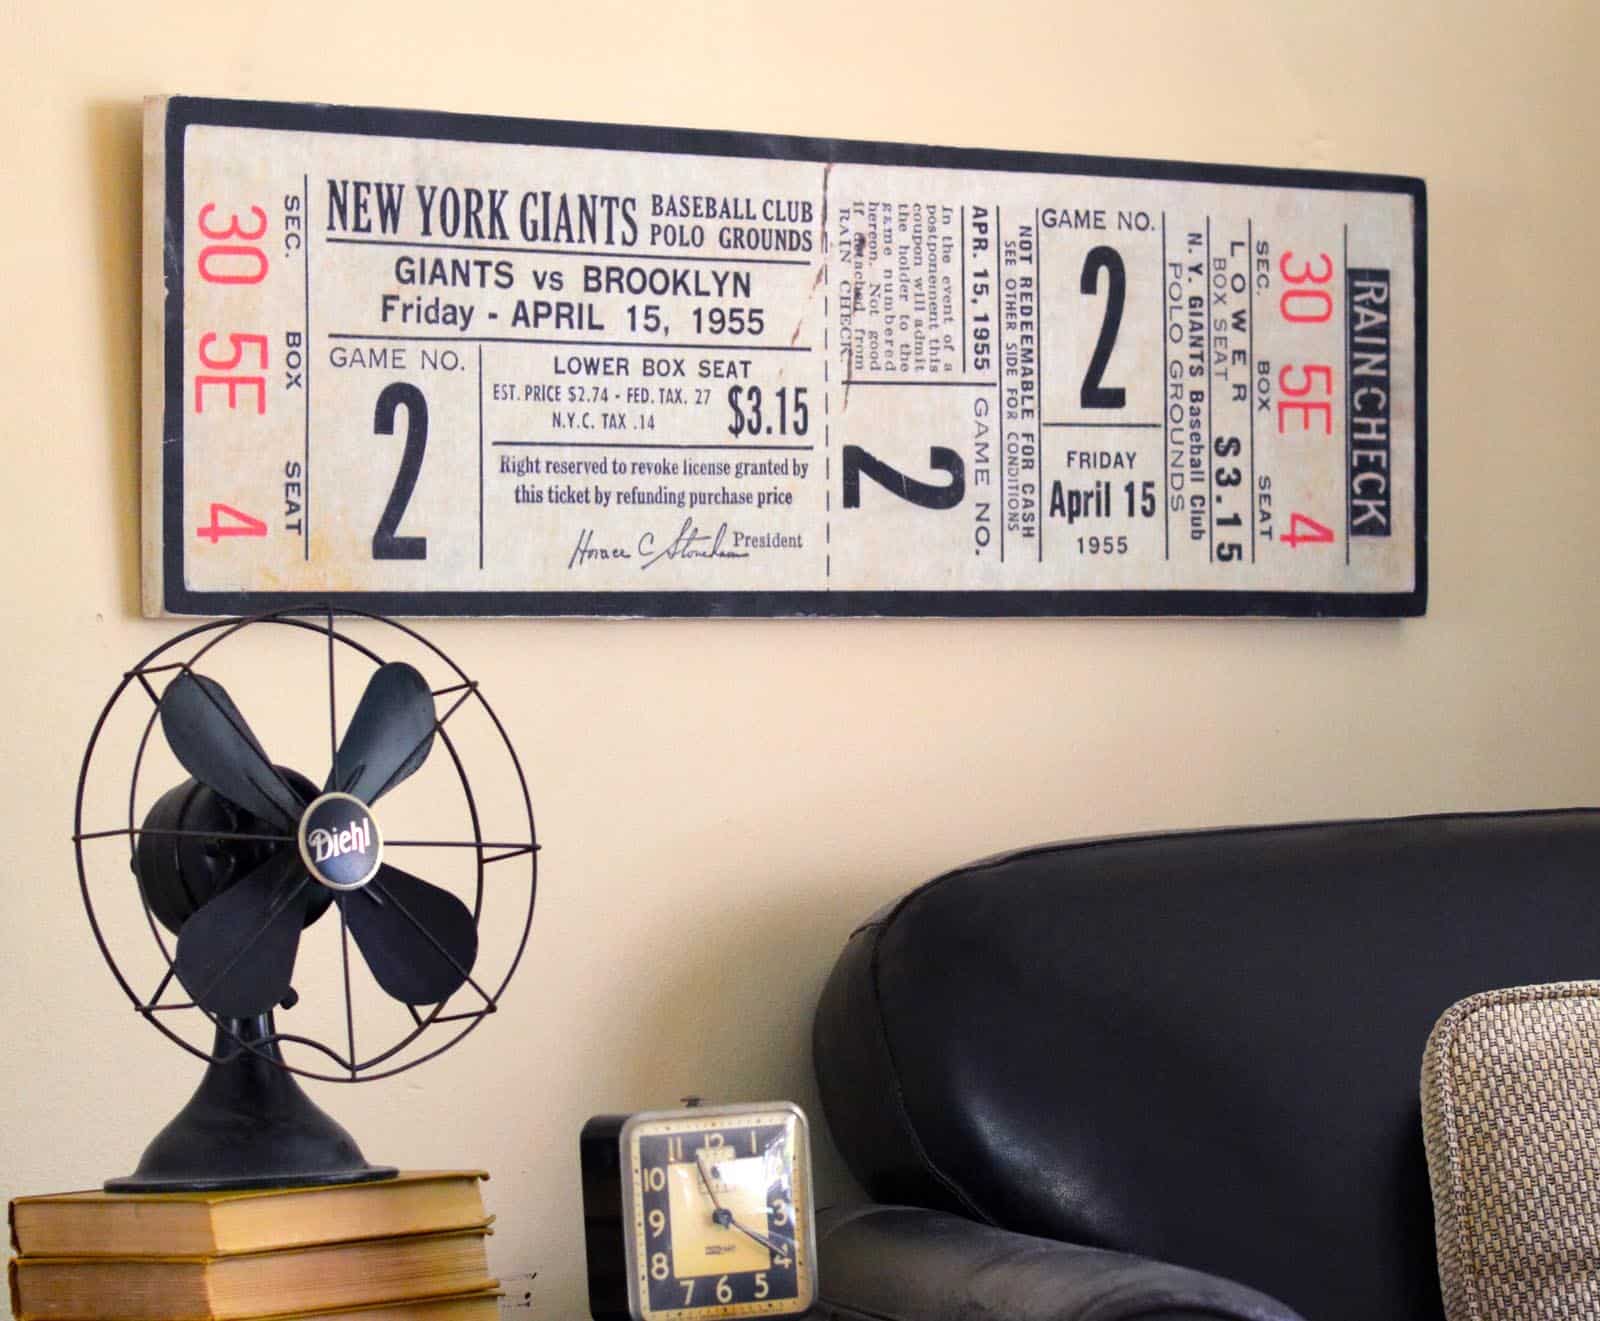 DIY baseball decor for your wall using a ticket print